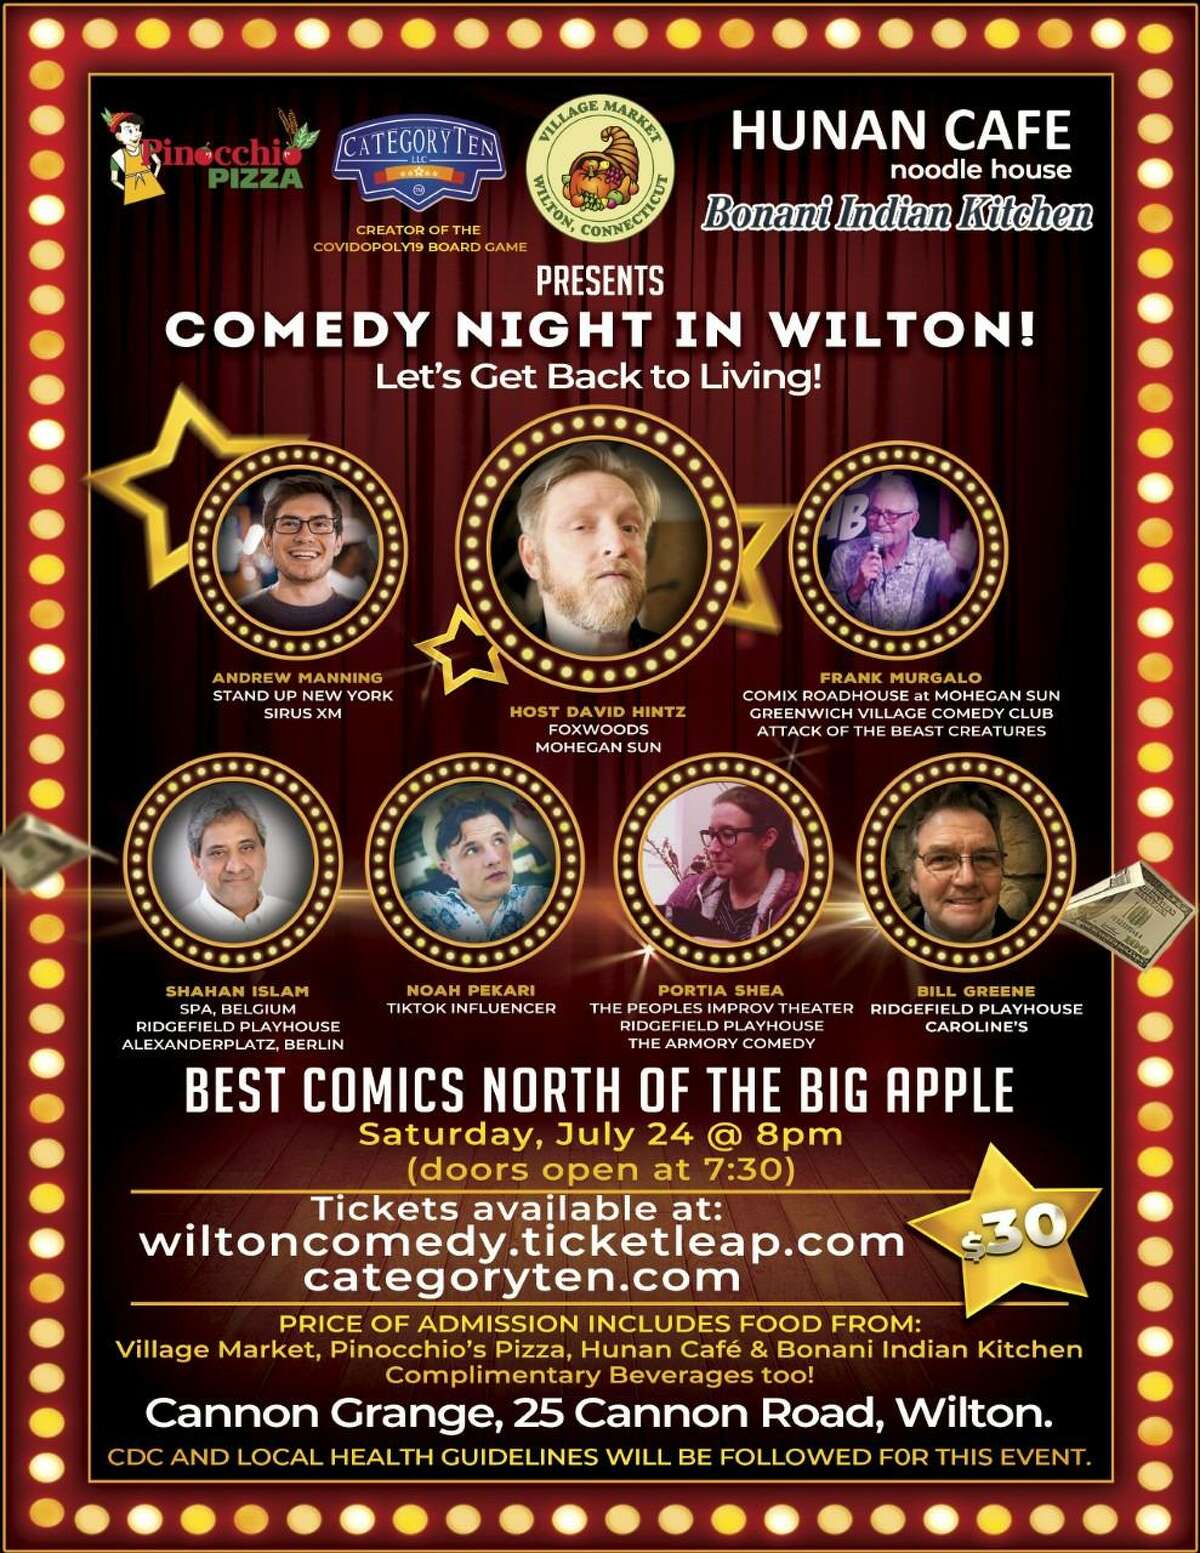 Now that businesses are fully reopening amid the coronavirus pandemic, CategoryTen, local restaurants, Cannon Grange, Shahan Islam of Wilton, and comedians are trying to bring back quality live entertainment with a Comedy Night in the town at the community organization on Saturday, July 24, at 8 p.m.